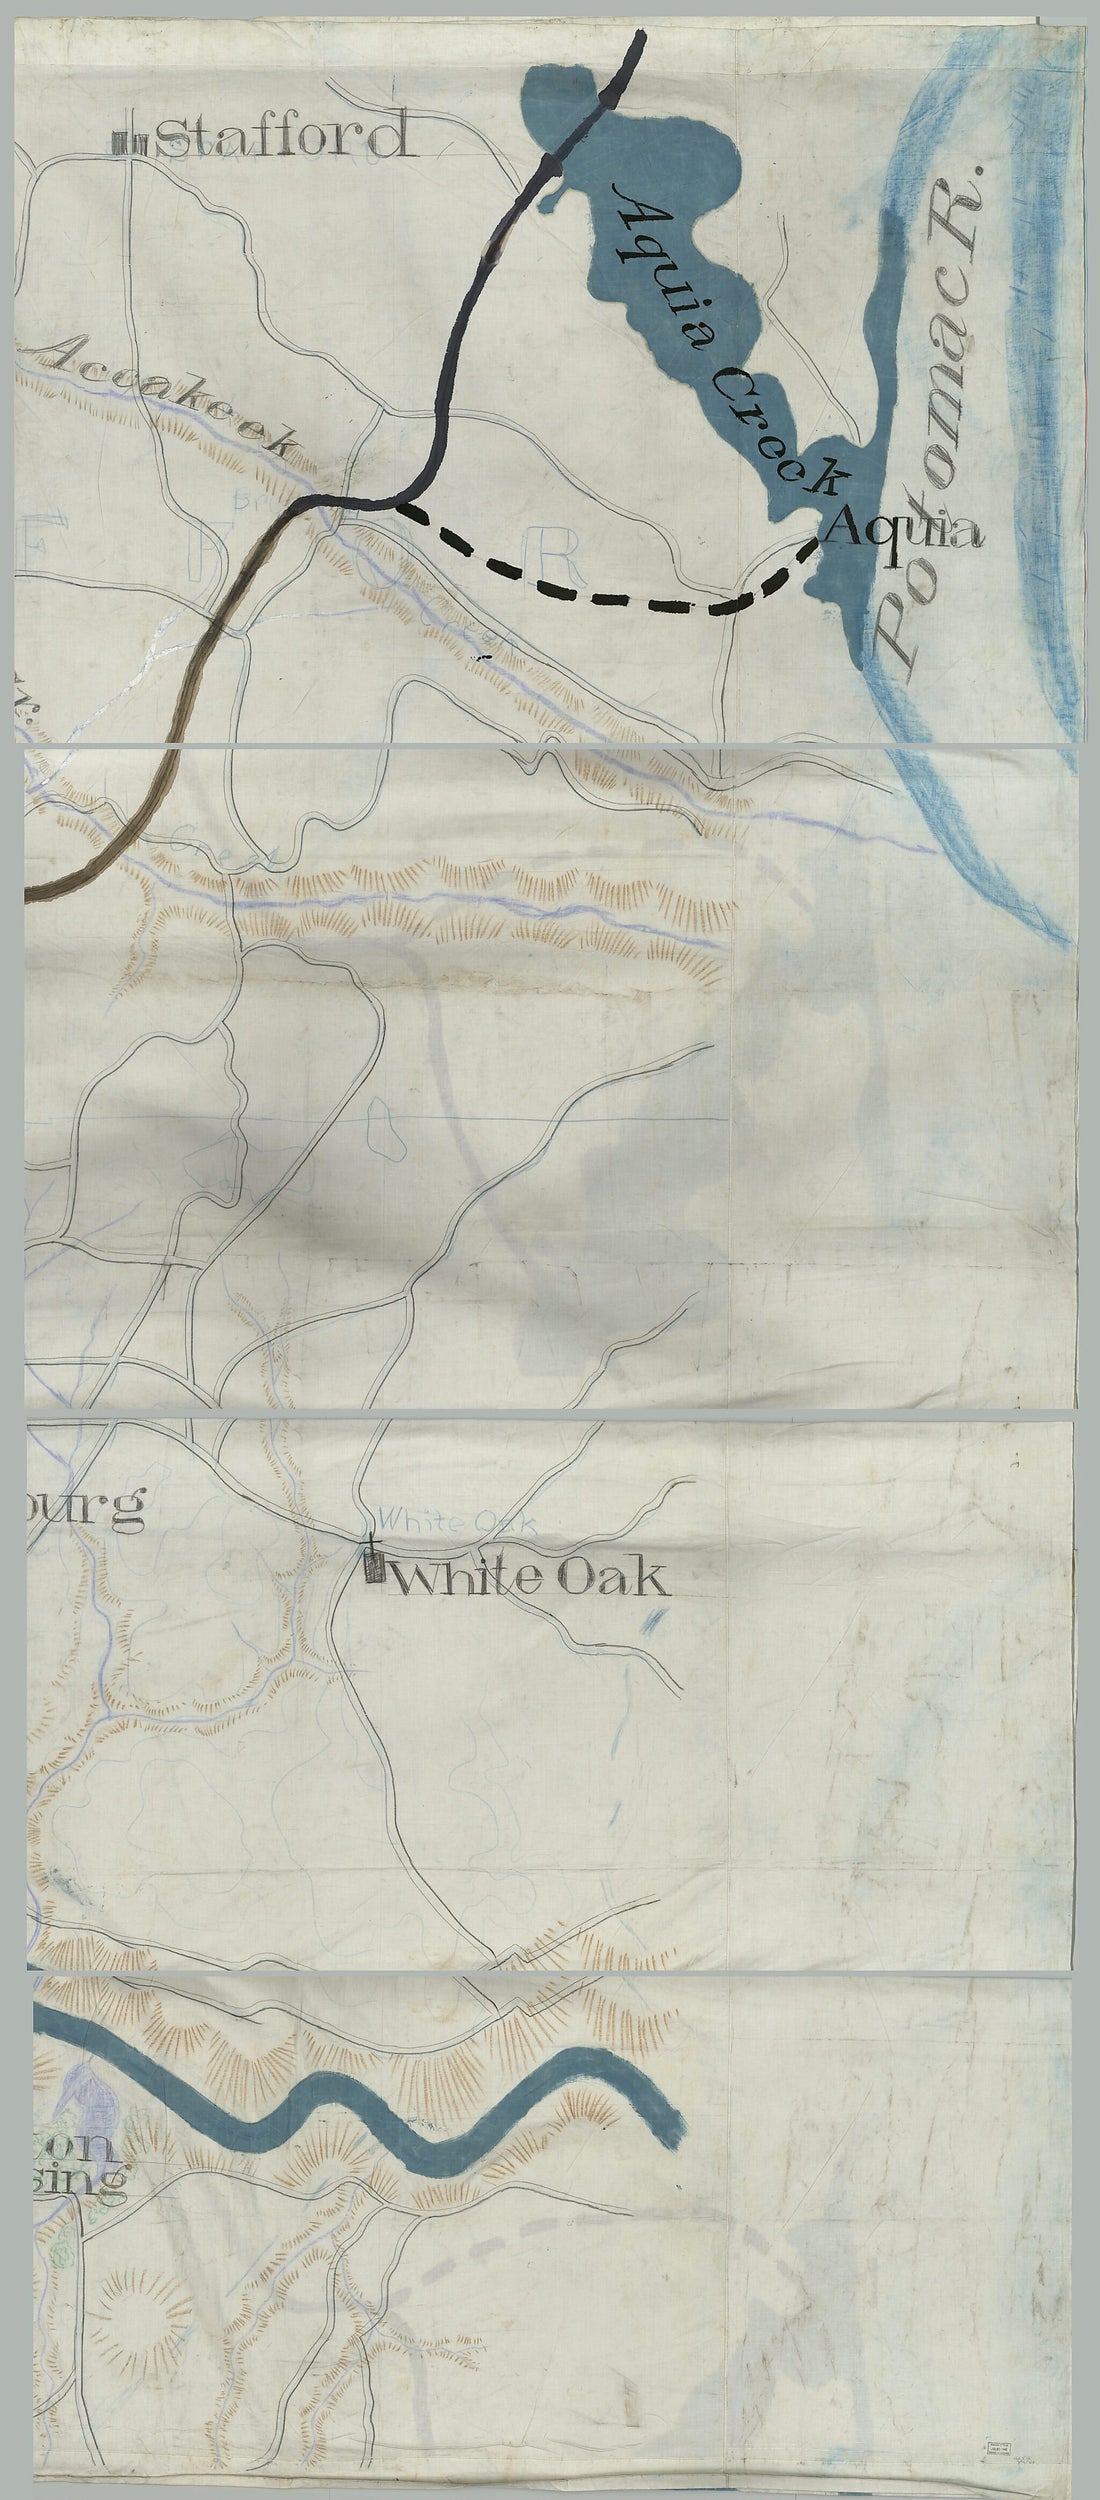 This old map of 1863 from 1862 was created by Jedediah Hotchkiss in 1862